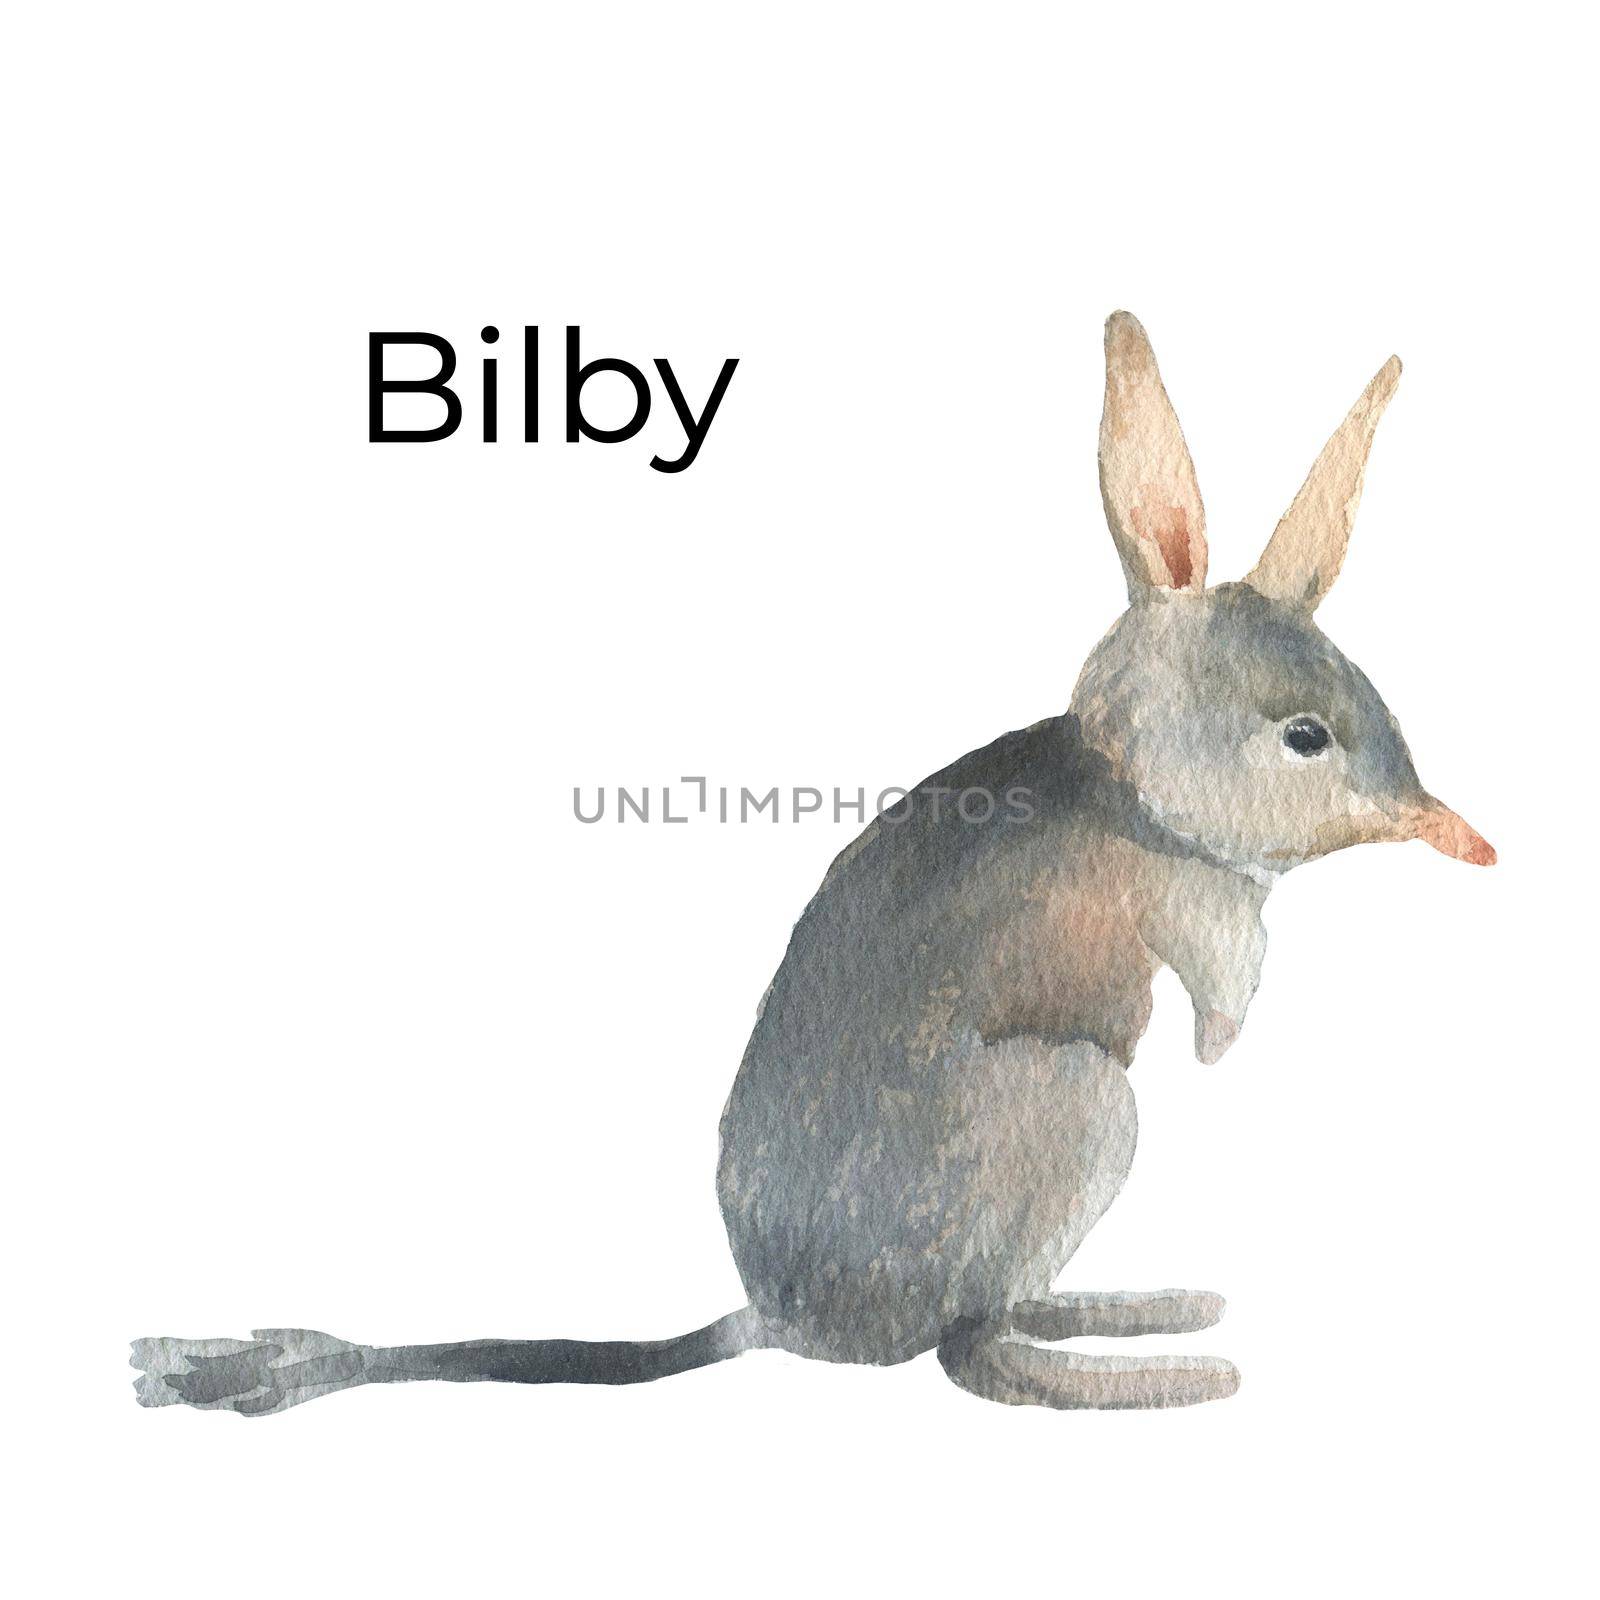 Australian animal watercolor illustration isolated on white background. Cute hand drawn bilby. Australia Day